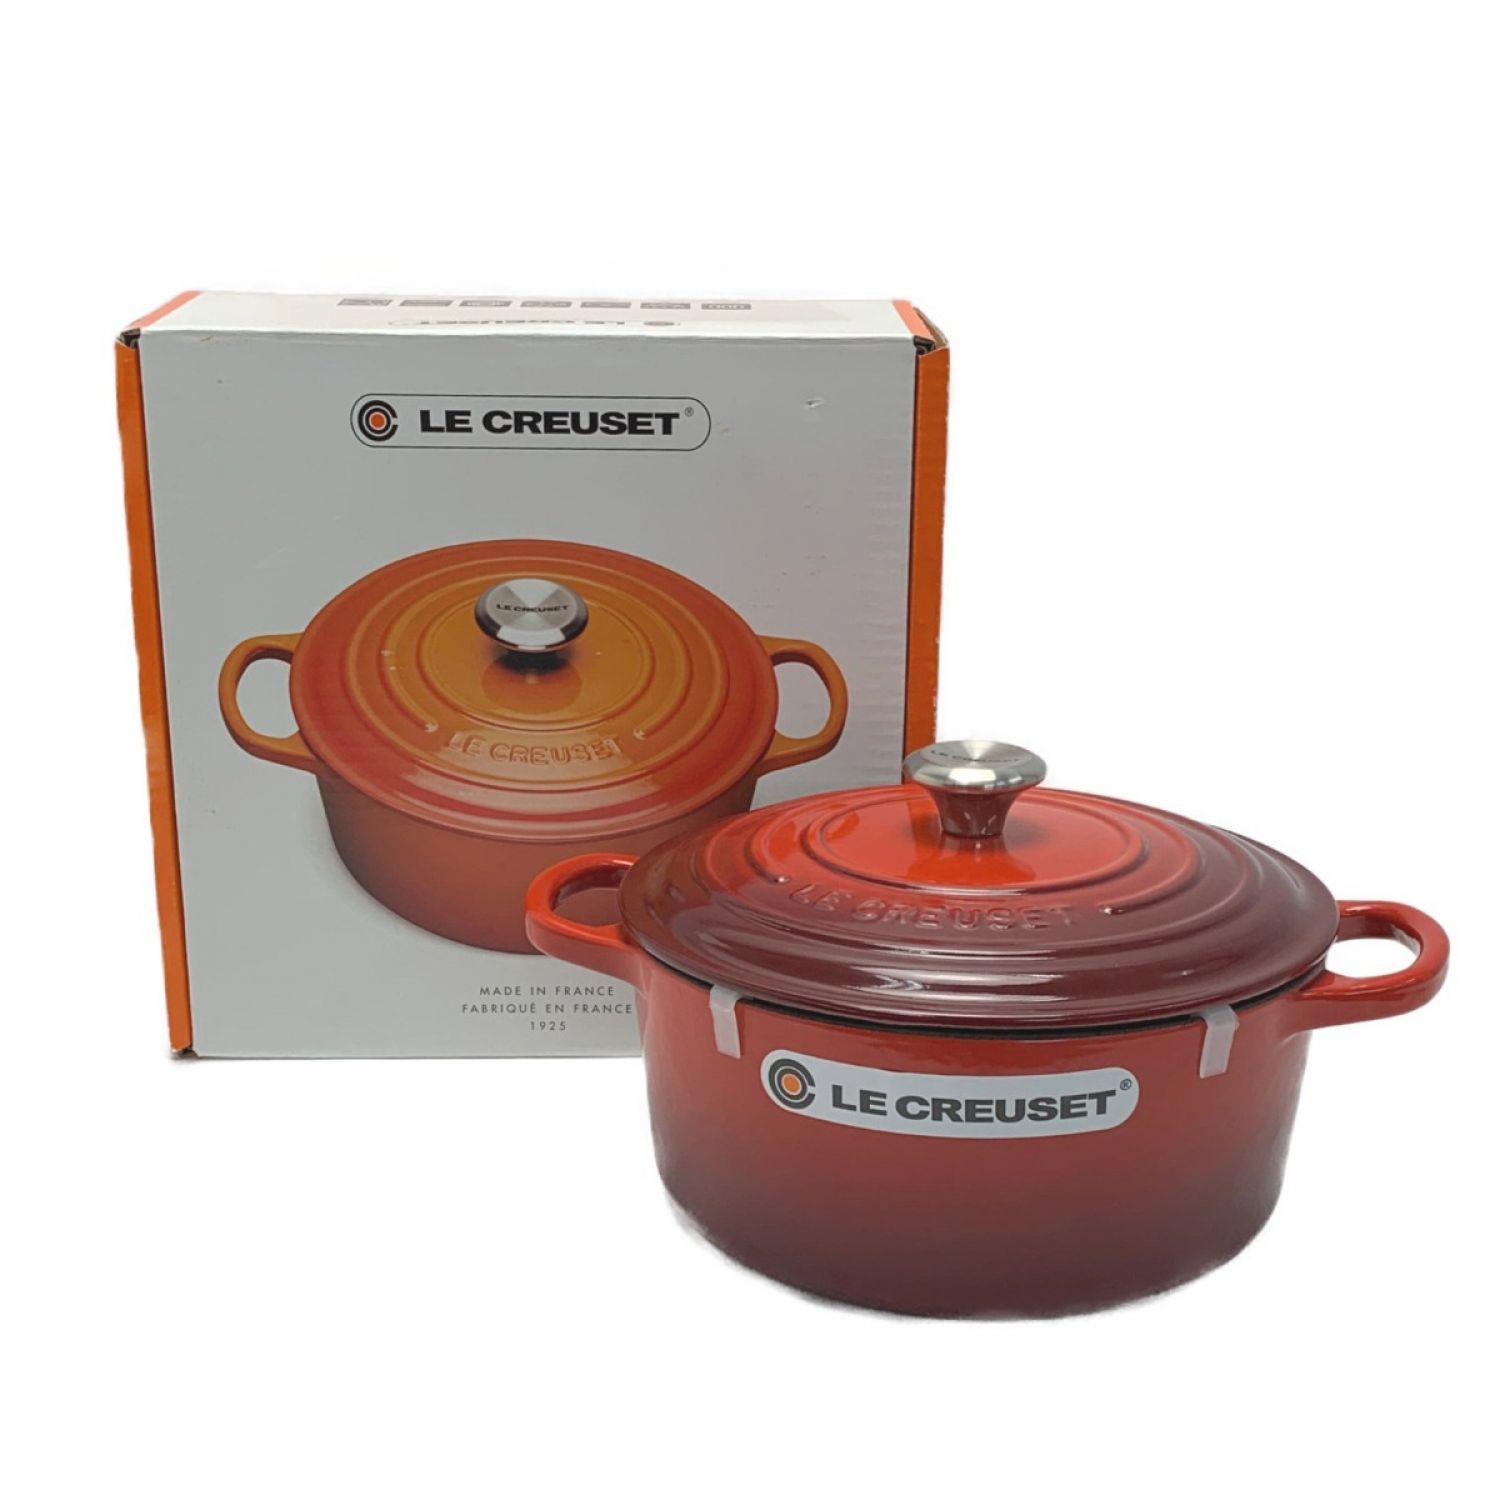 LE CREUSET　ココットロンド チェリーレッド 鍋 両手鍋 20cm